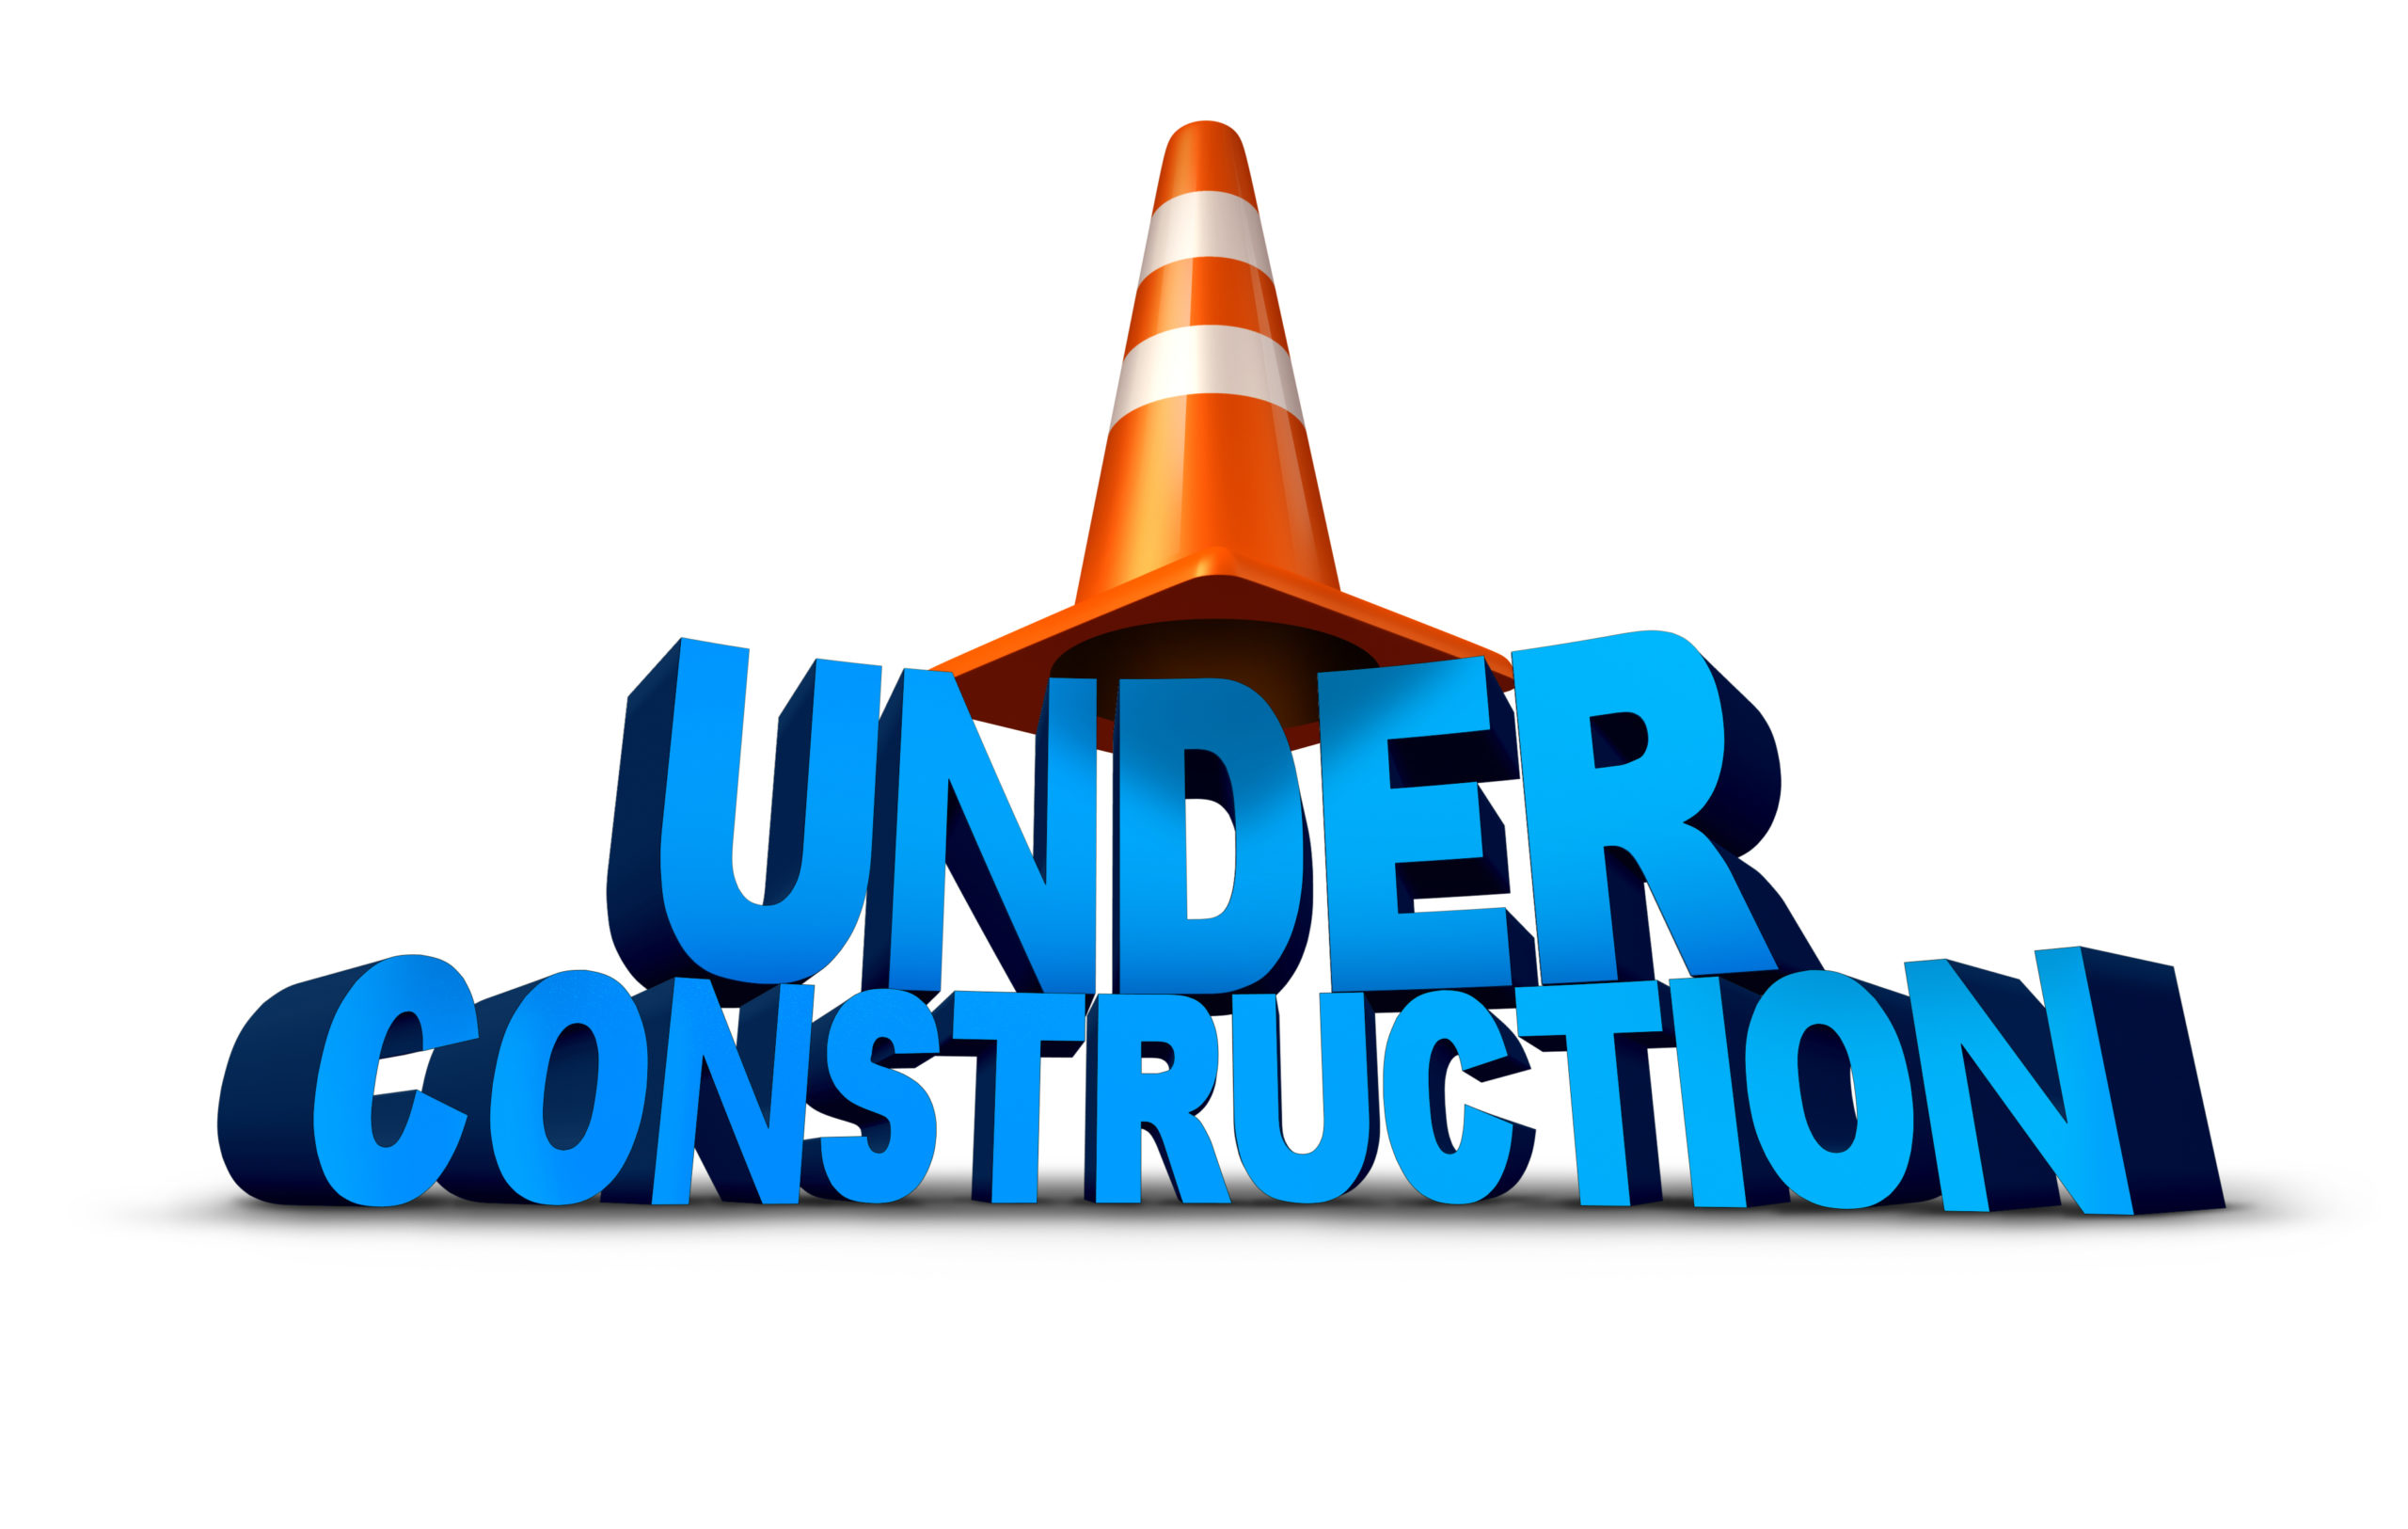 Under construction symbol as three dimensional text with a traffic cone as an icon for the technology concept of updating a website or remodeling and fixing a broken structure on a white background.